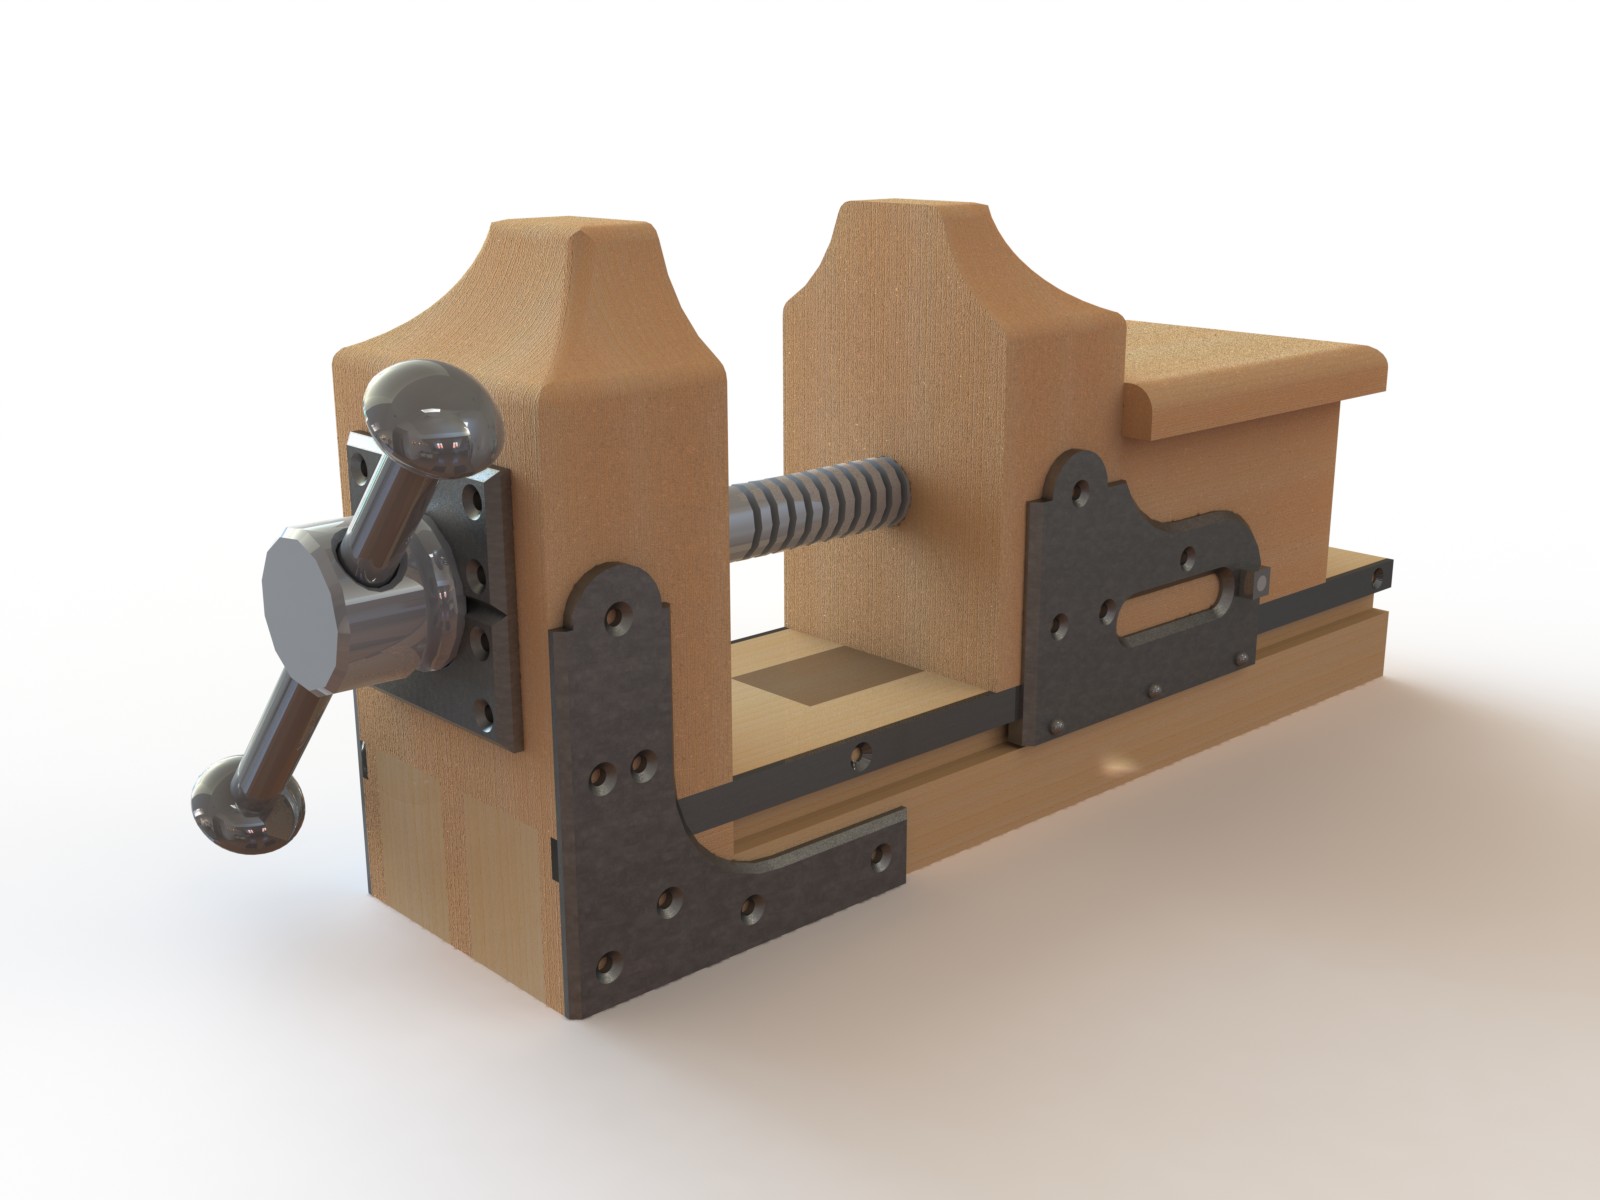 de bamboo: This is How to build a woodworking vise